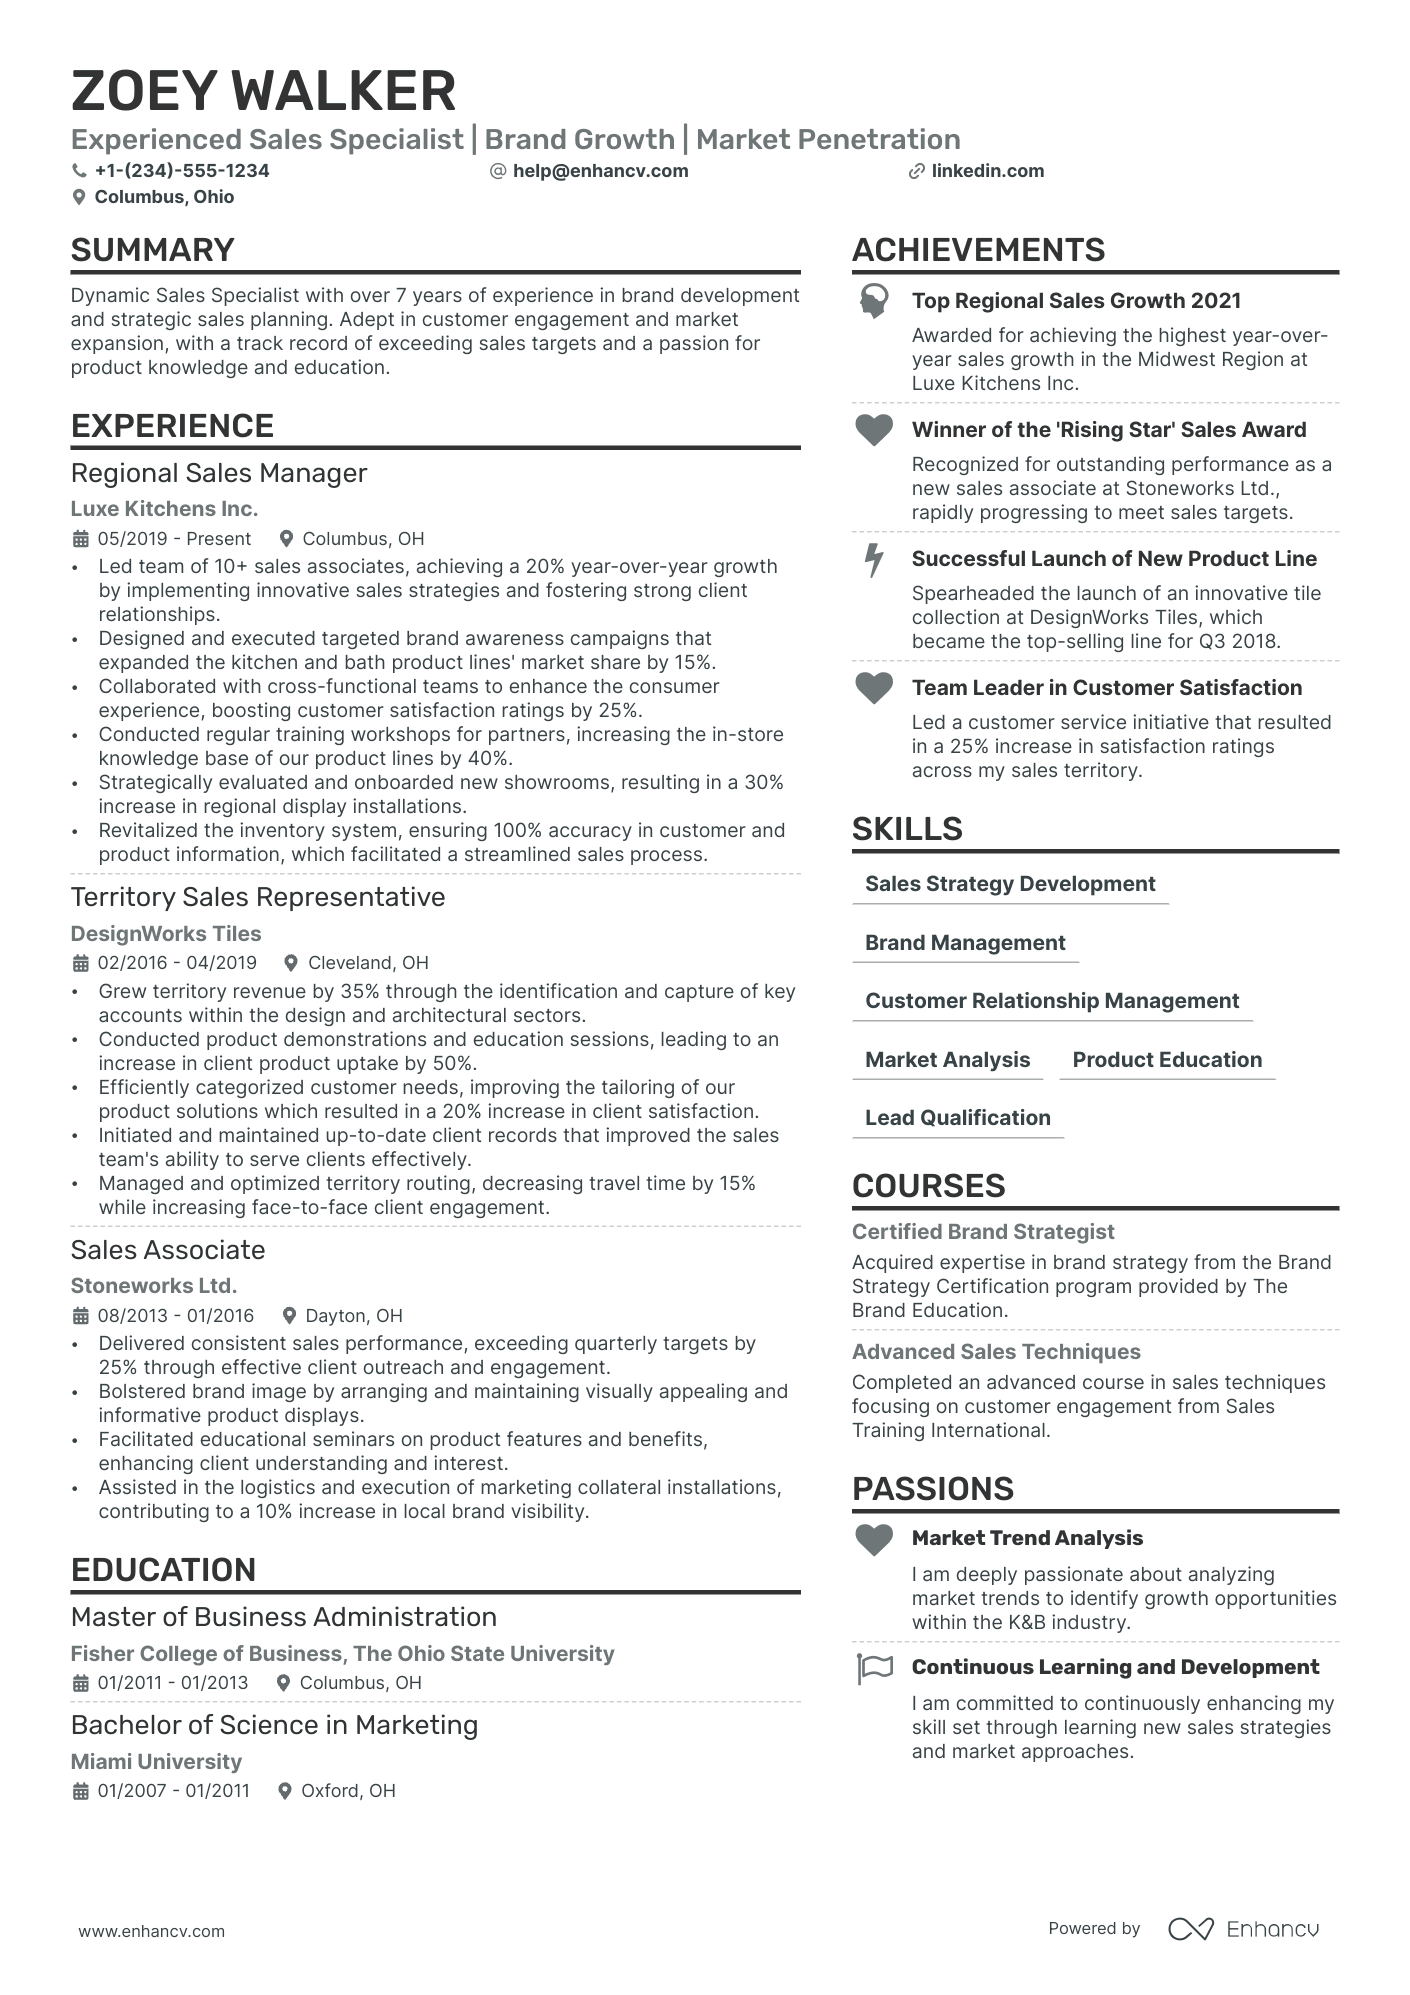 Sales Promoter resume example